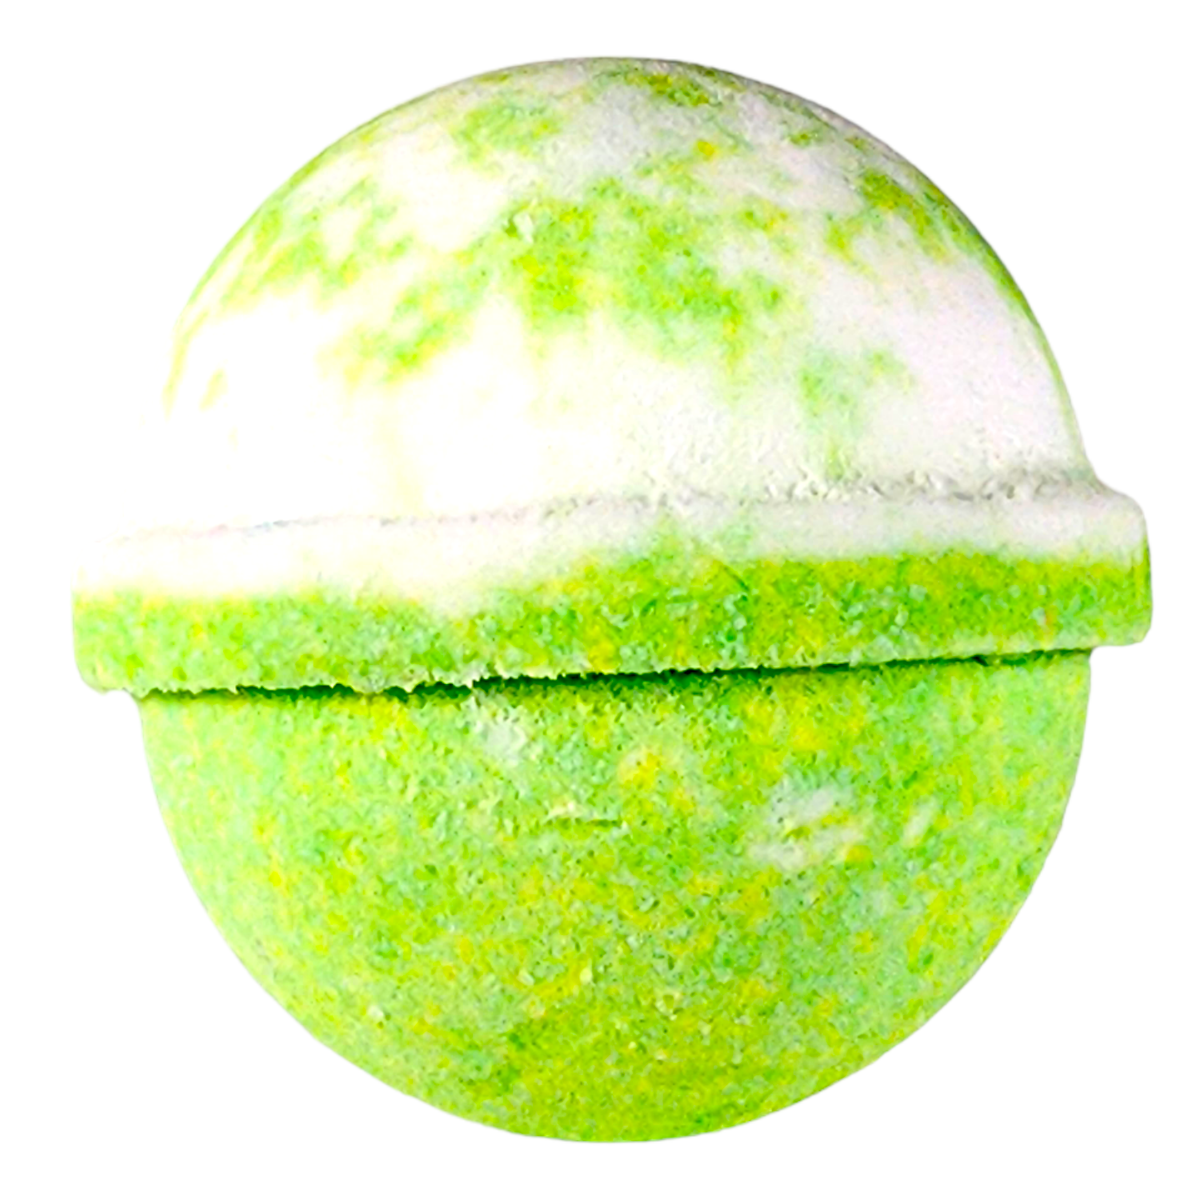 Large Bath Bomb - 26 Scents -With Skin-Loving Moisturizers: Hippie Chick